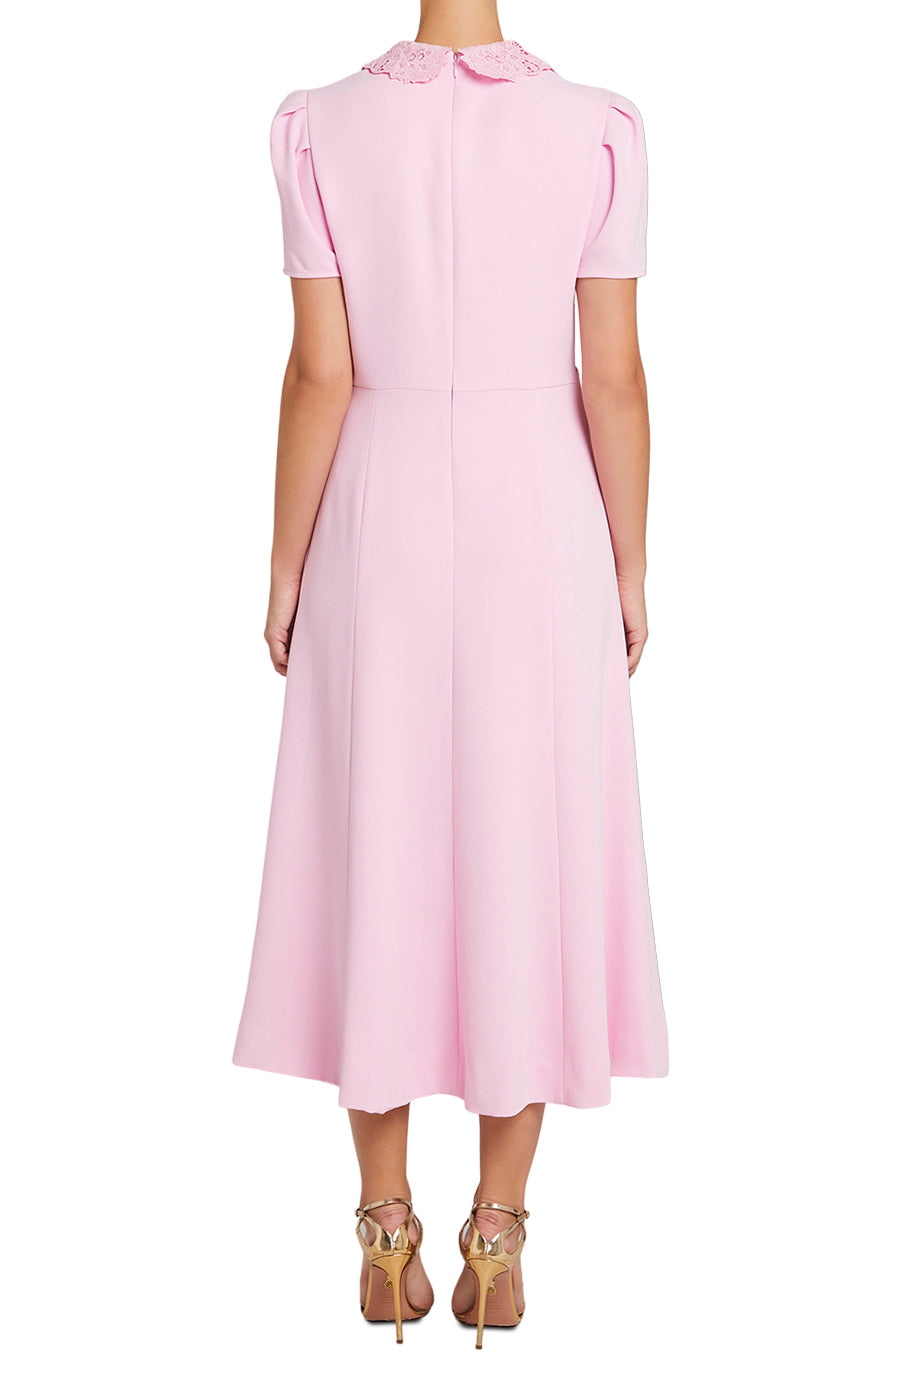 Buy online Pink Crepe Dress from western wear for Women by Heer Tex for  ₹499 at 29% off